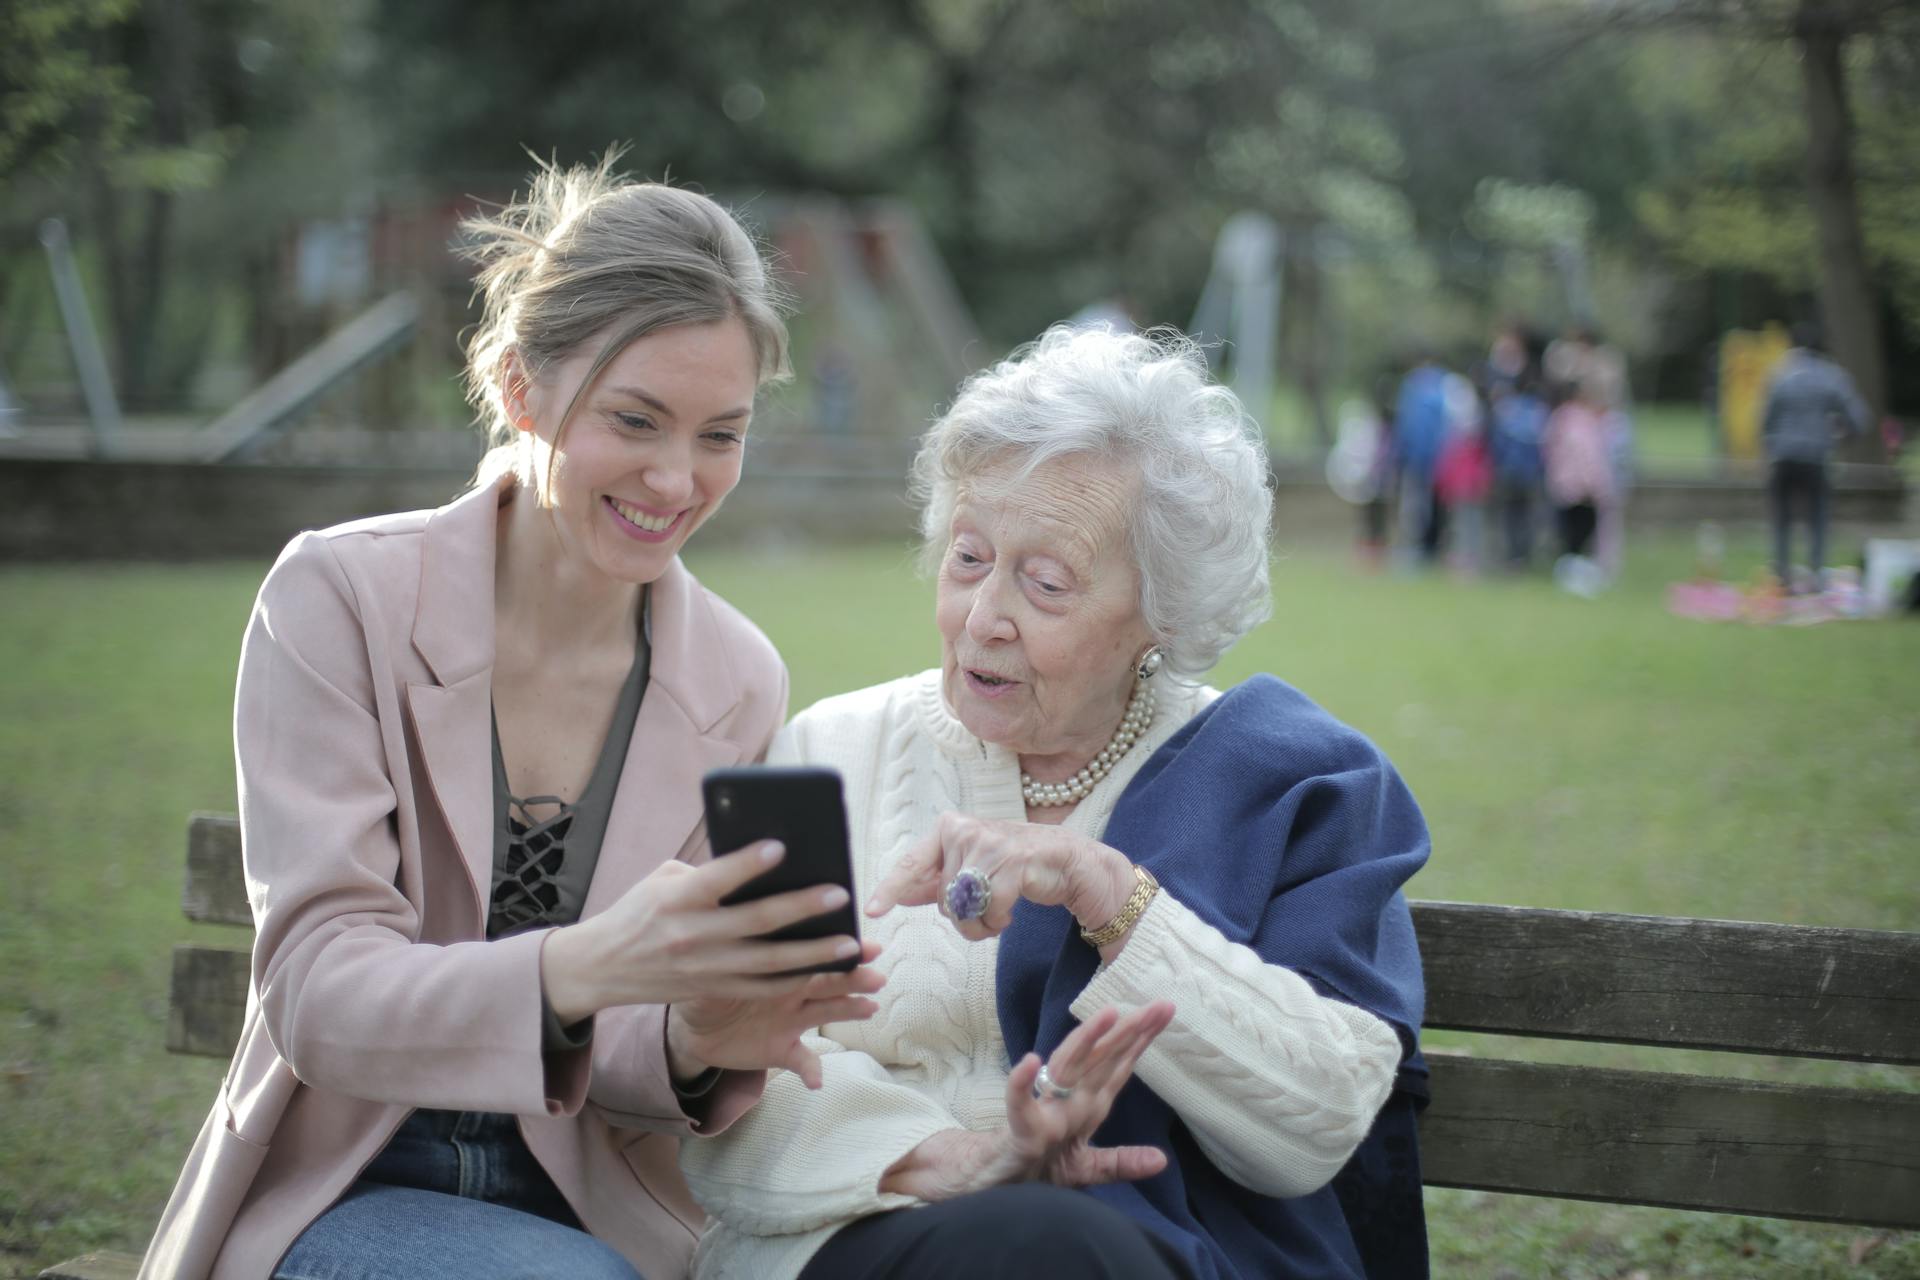 A woman helping a senior lady on her phone